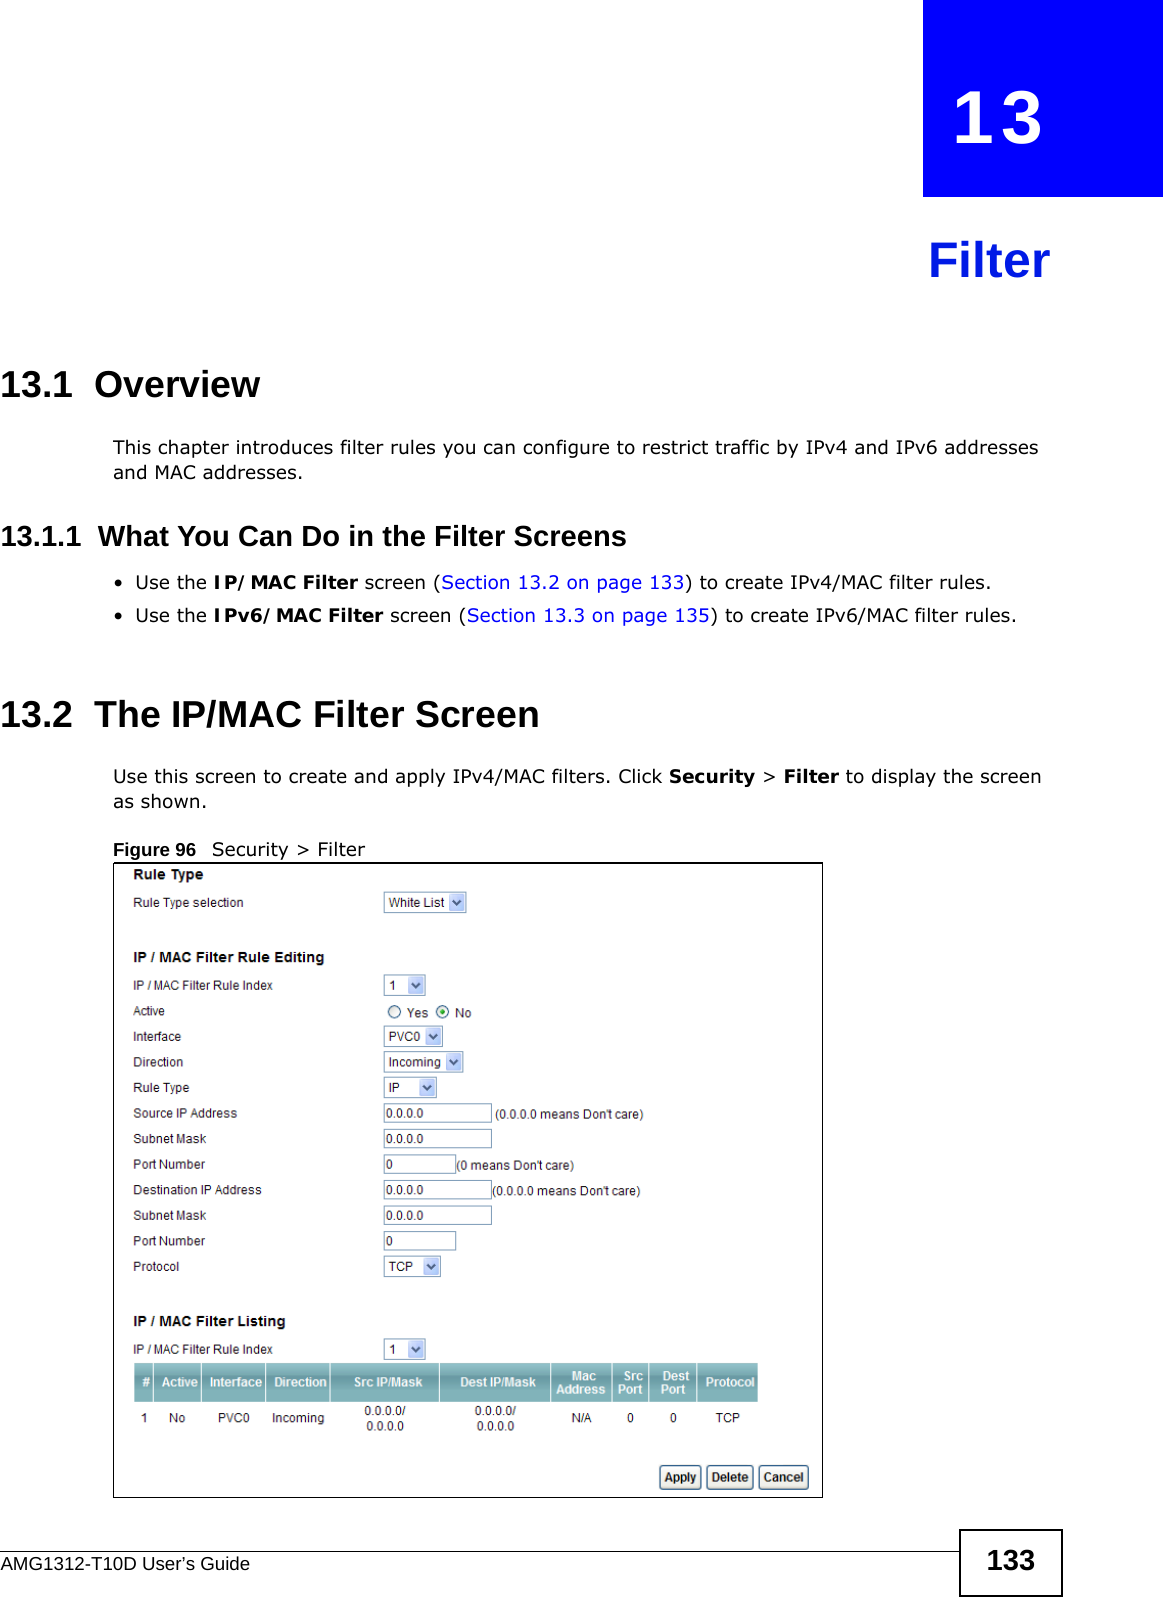 AMG1312-T10D User’s Guide 133CHAPTER   13Filter13.1  Overview This chapter introduces filter rules you can configure to restrict traffic by IPv4 and IPv6 addresses and MAC addresses.13.1.1  What You Can Do in the Filter Screens•Use the IP/MAC Filter screen (Section 13.2 on page 133) to create IPv4/MAC filter rules.•Use the IPv6/MAC Filter screen (Section 13.3 on page 135) to create IPv6/MAC filter rules.13.2  The IP/MAC Filter ScreenUse this screen to create and apply IPv4/MAC filters. Click Security &gt; Filter to display the screen as shown.Figure 96   Security &gt; Filter 